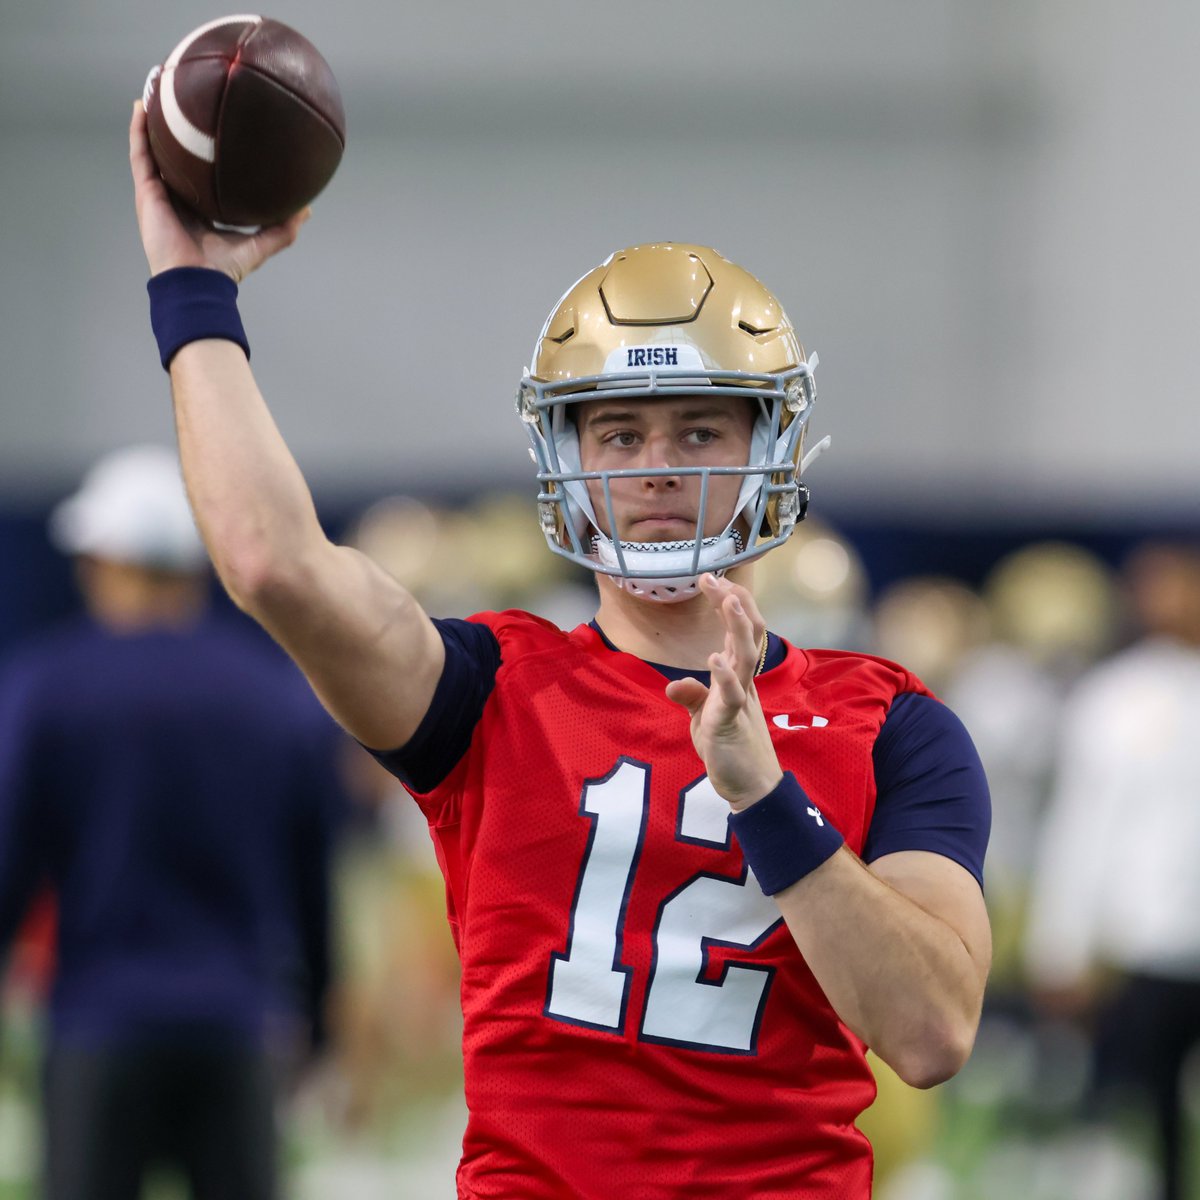 Notre Dame quarterbacks coach Gino Guidugli said freshman CJ Carr 'can really throw the ball.' “You go in there and he’s one of those guys in warm-ups where it’s like…buckle up. He’s going to be shooting at you pretty good.” on3.com/teams/notre-da…